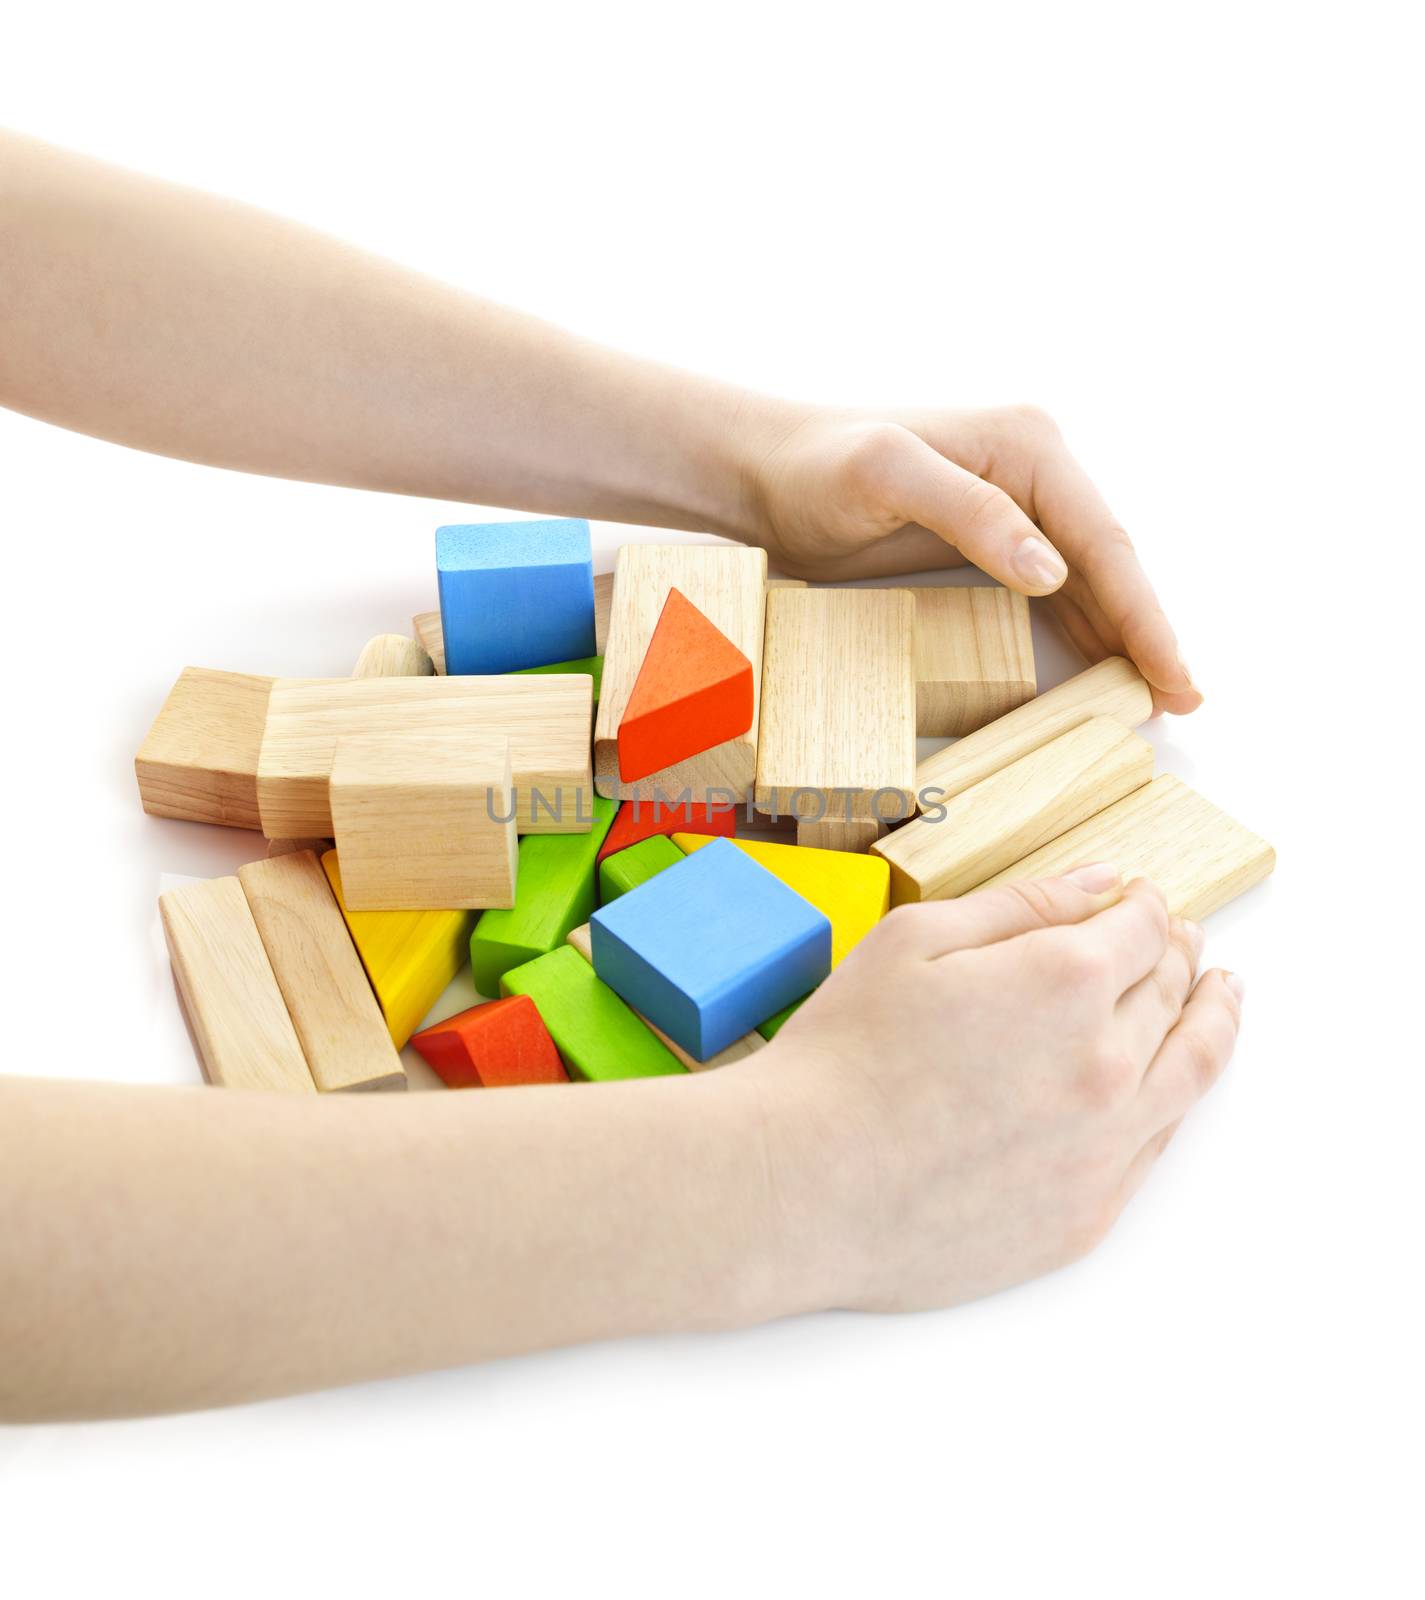 Hands with wooden block toys by elenathewise